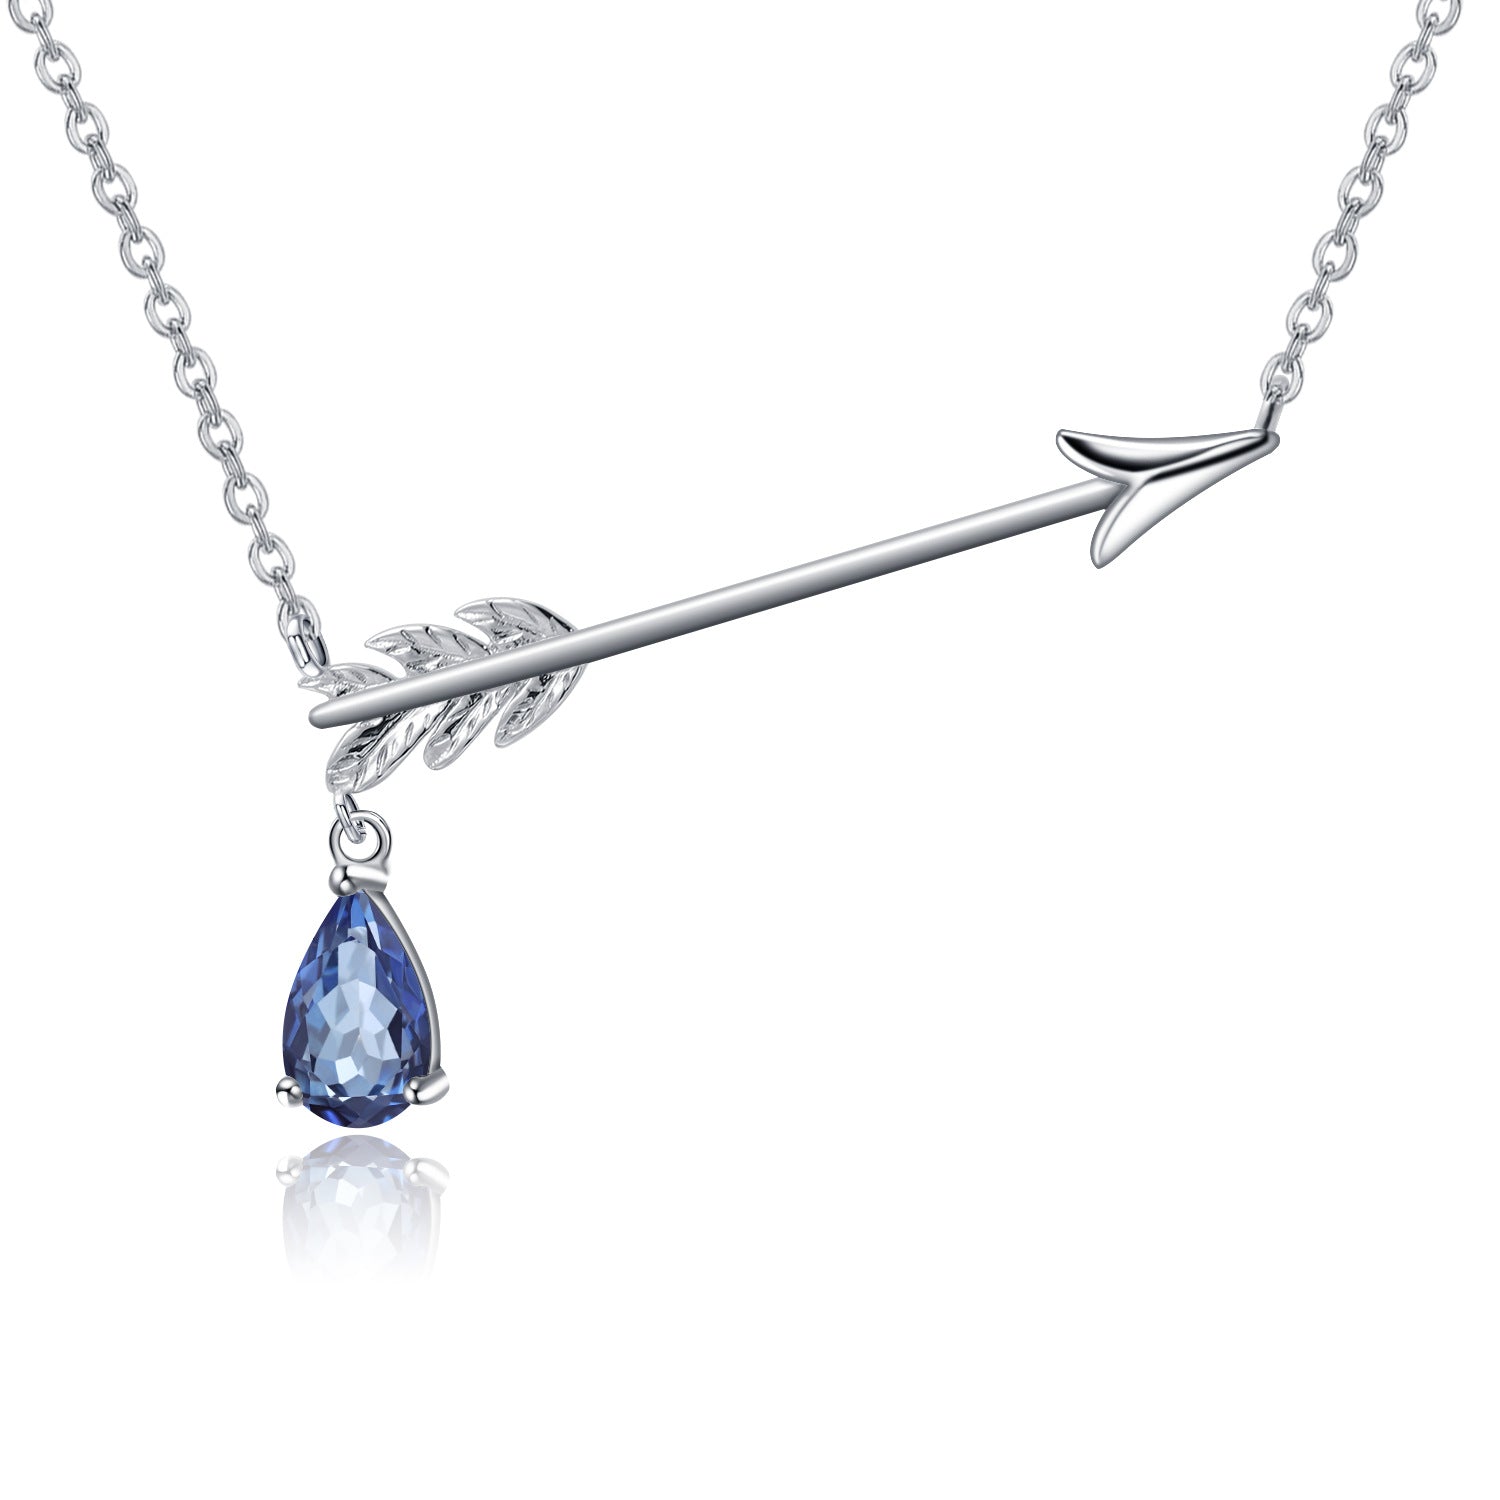 Unique Design with Natural Colourful Gemstone Bow and Arrow Pendant Silver Necklace for Women